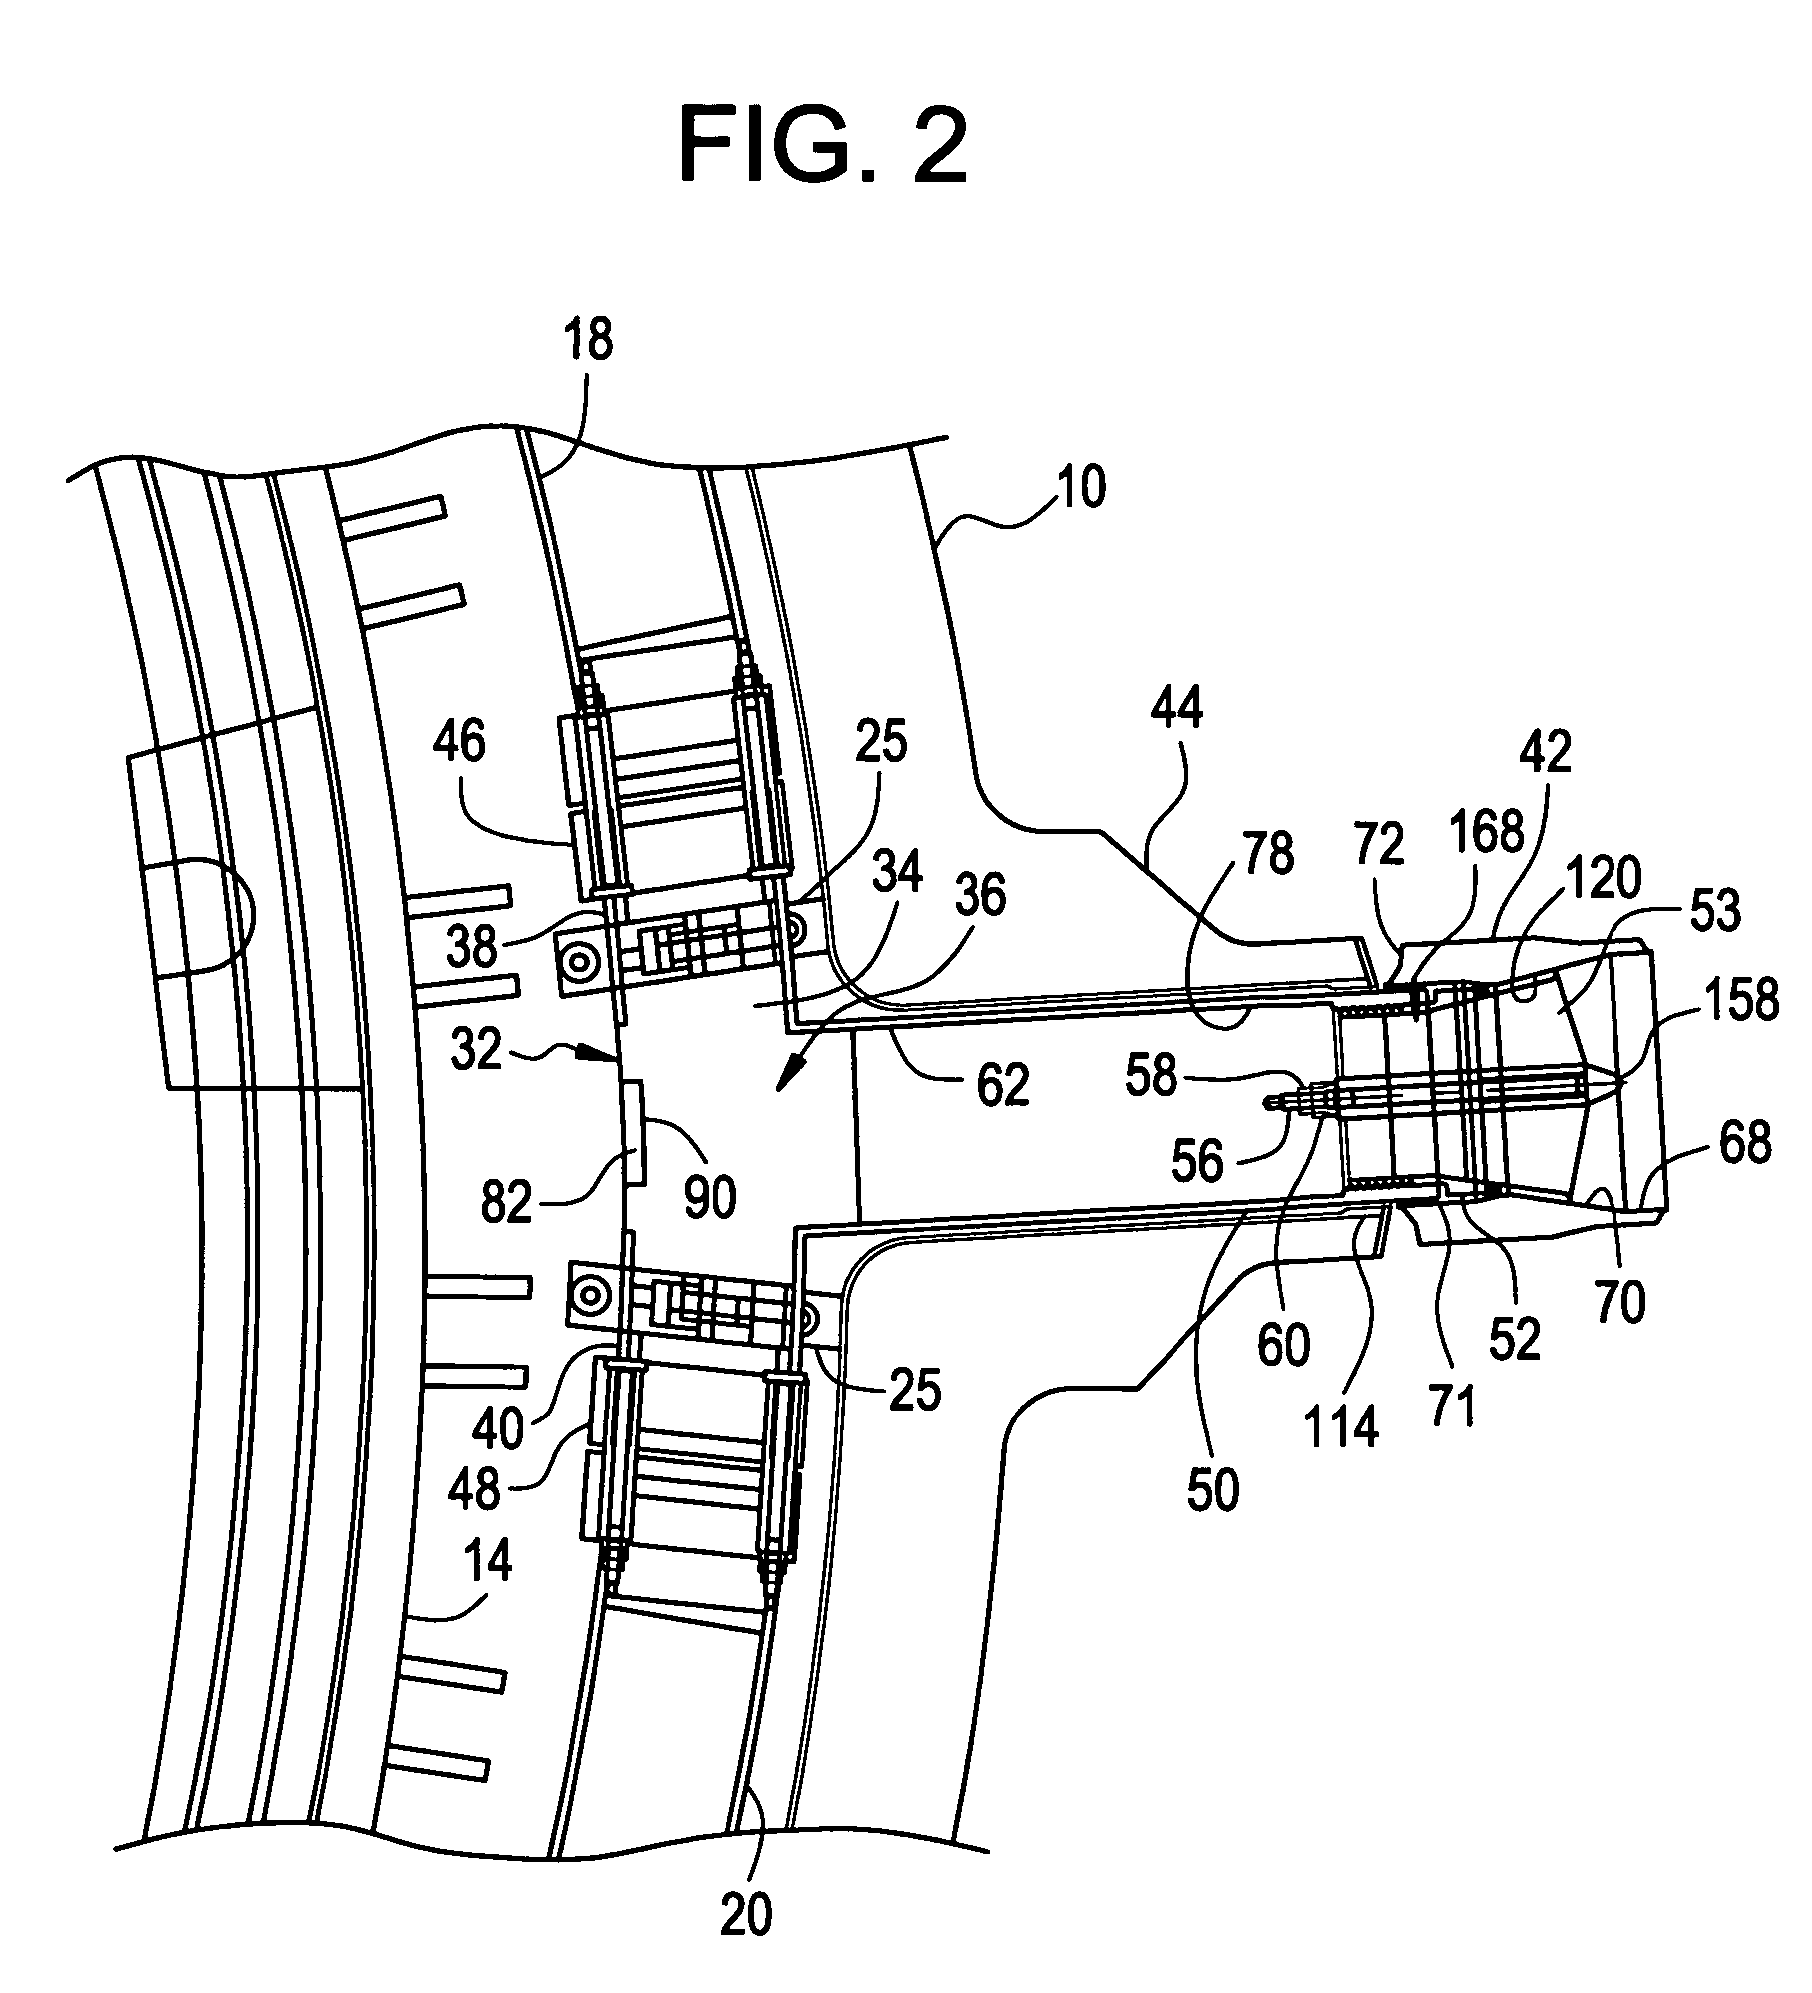 Core spray apparatus and method for installing the same